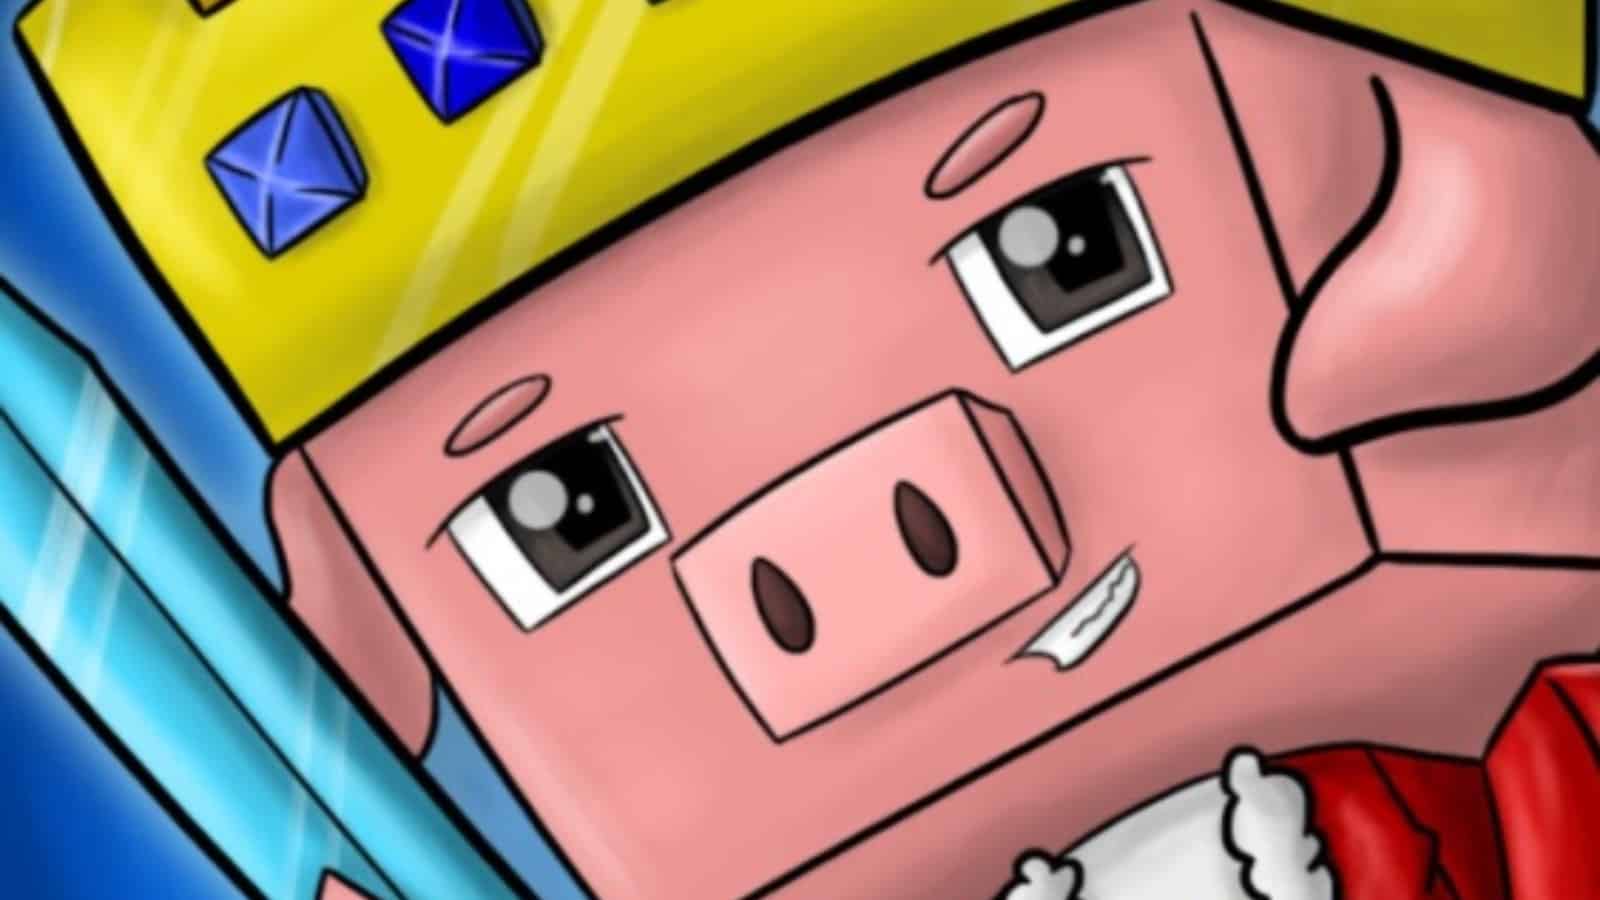 Technoblade raises $323k for charity with Minecraft stream where fans  control his fate - Dexerto